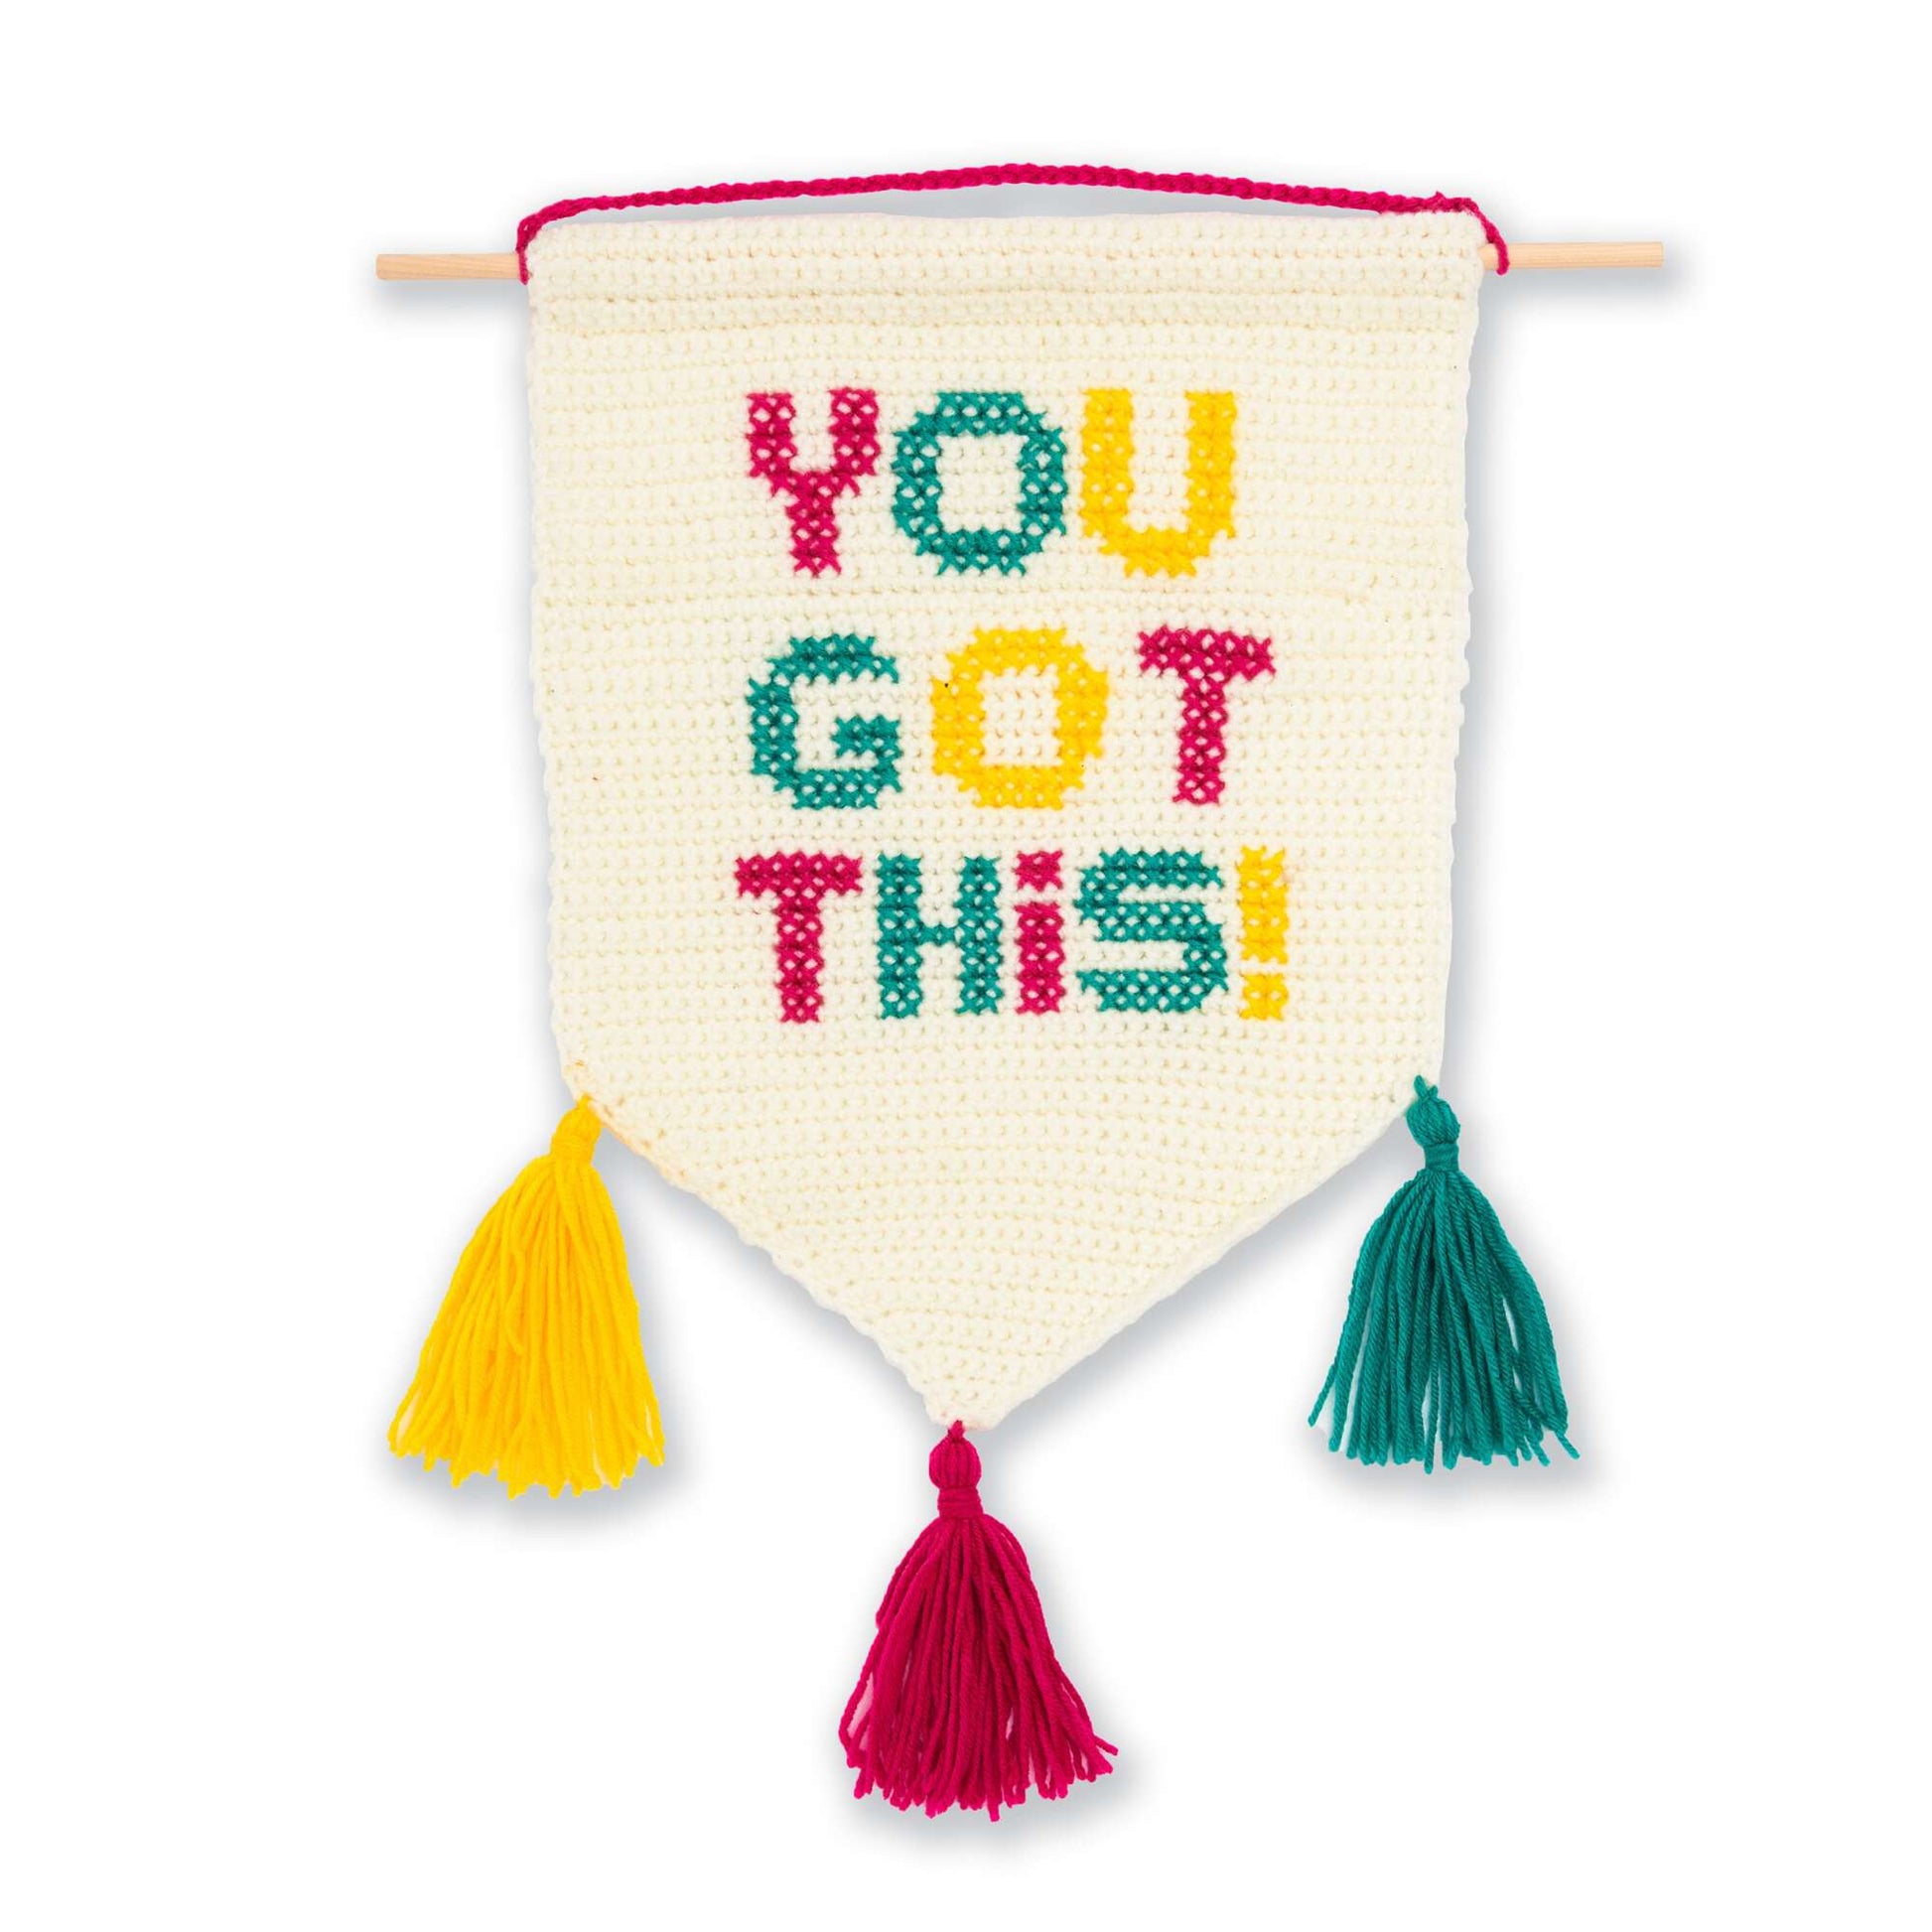 Free Red Heart “You Got This” Motivational Crochet Banner Pattern